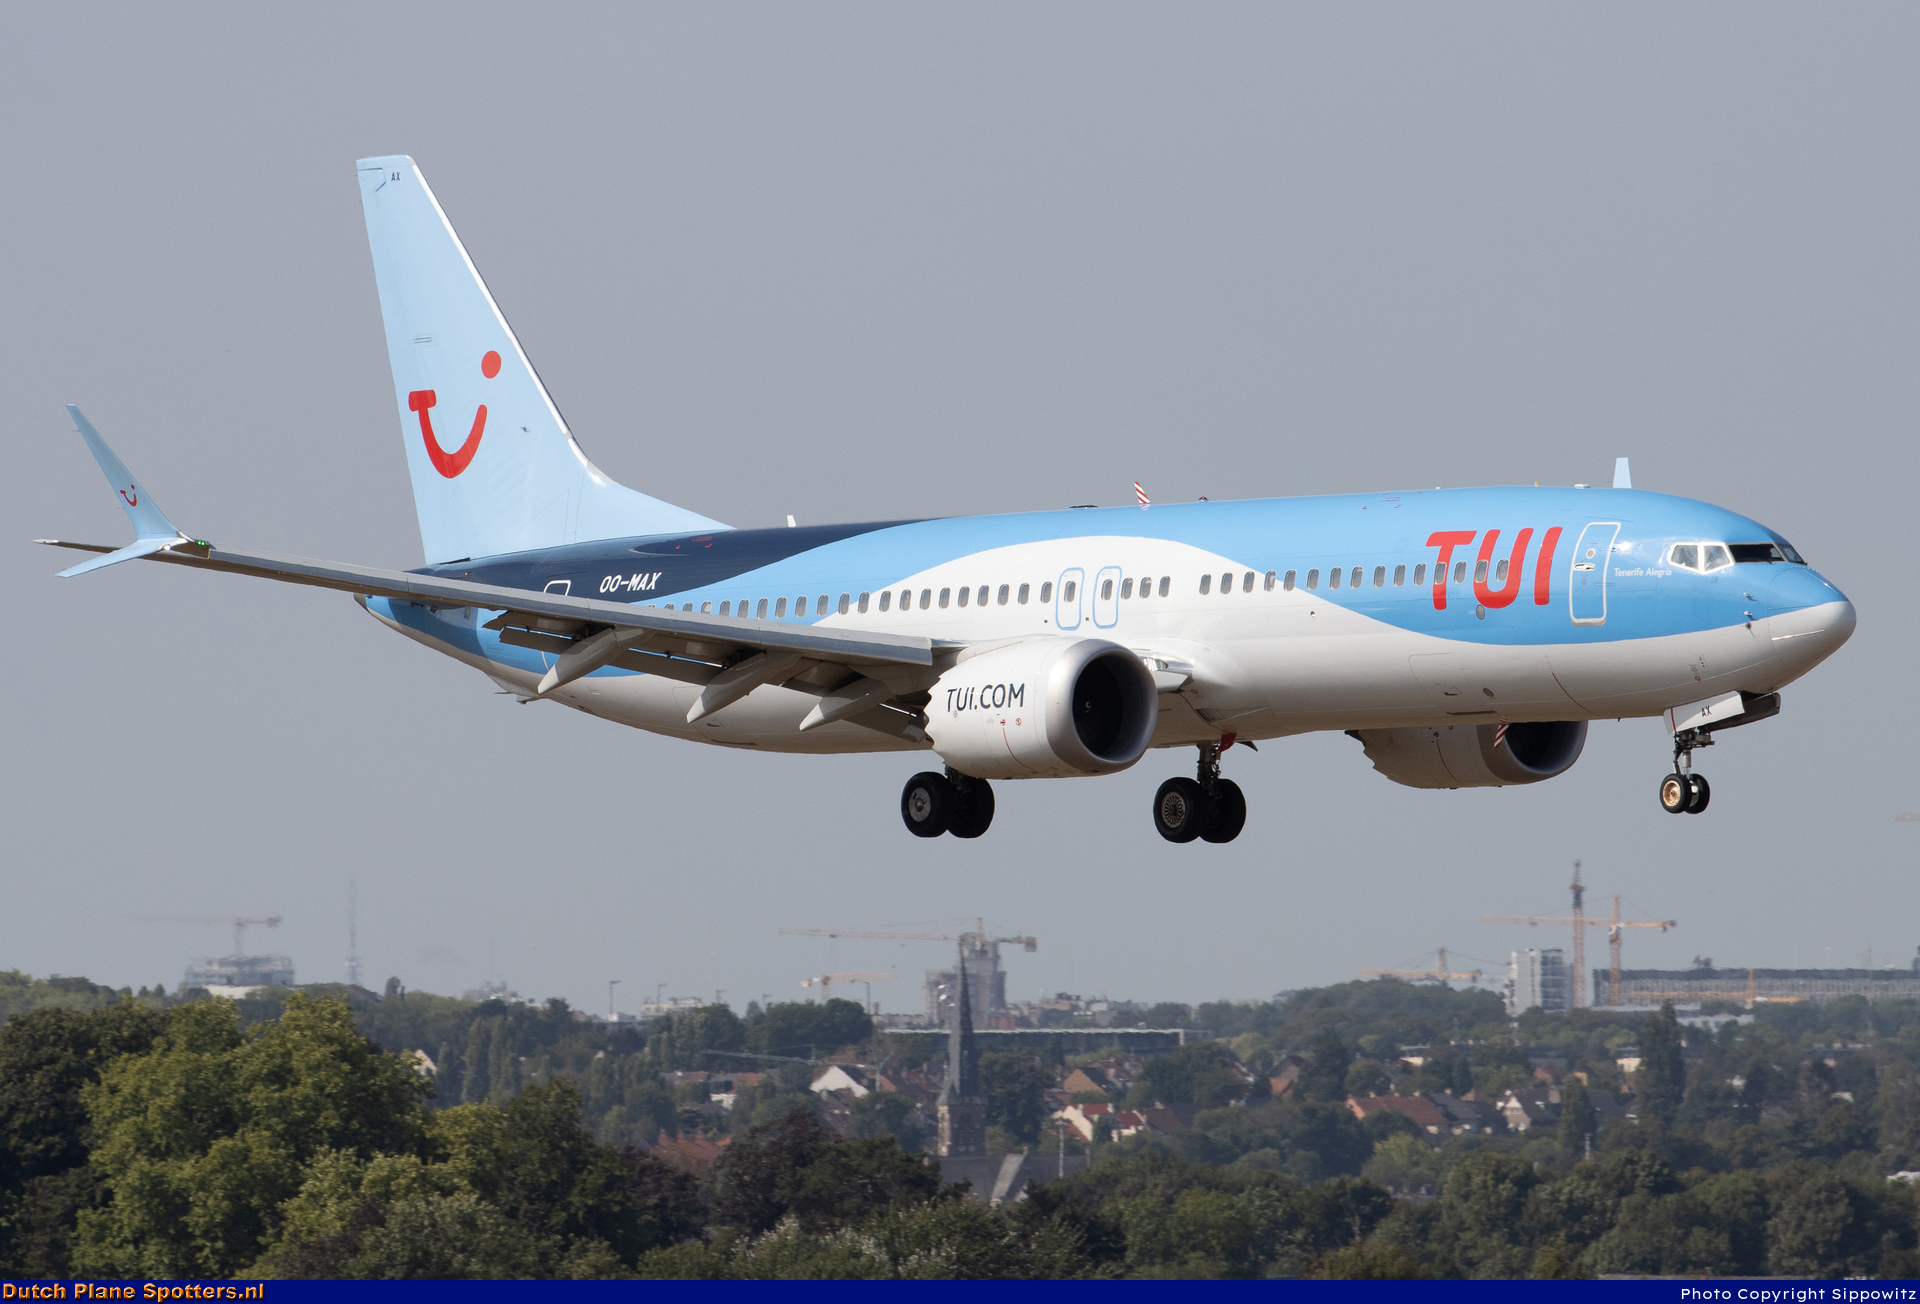 OO-MAX Boeing 737 MAX 8 TUI Airlines Belgium by Sippowitz